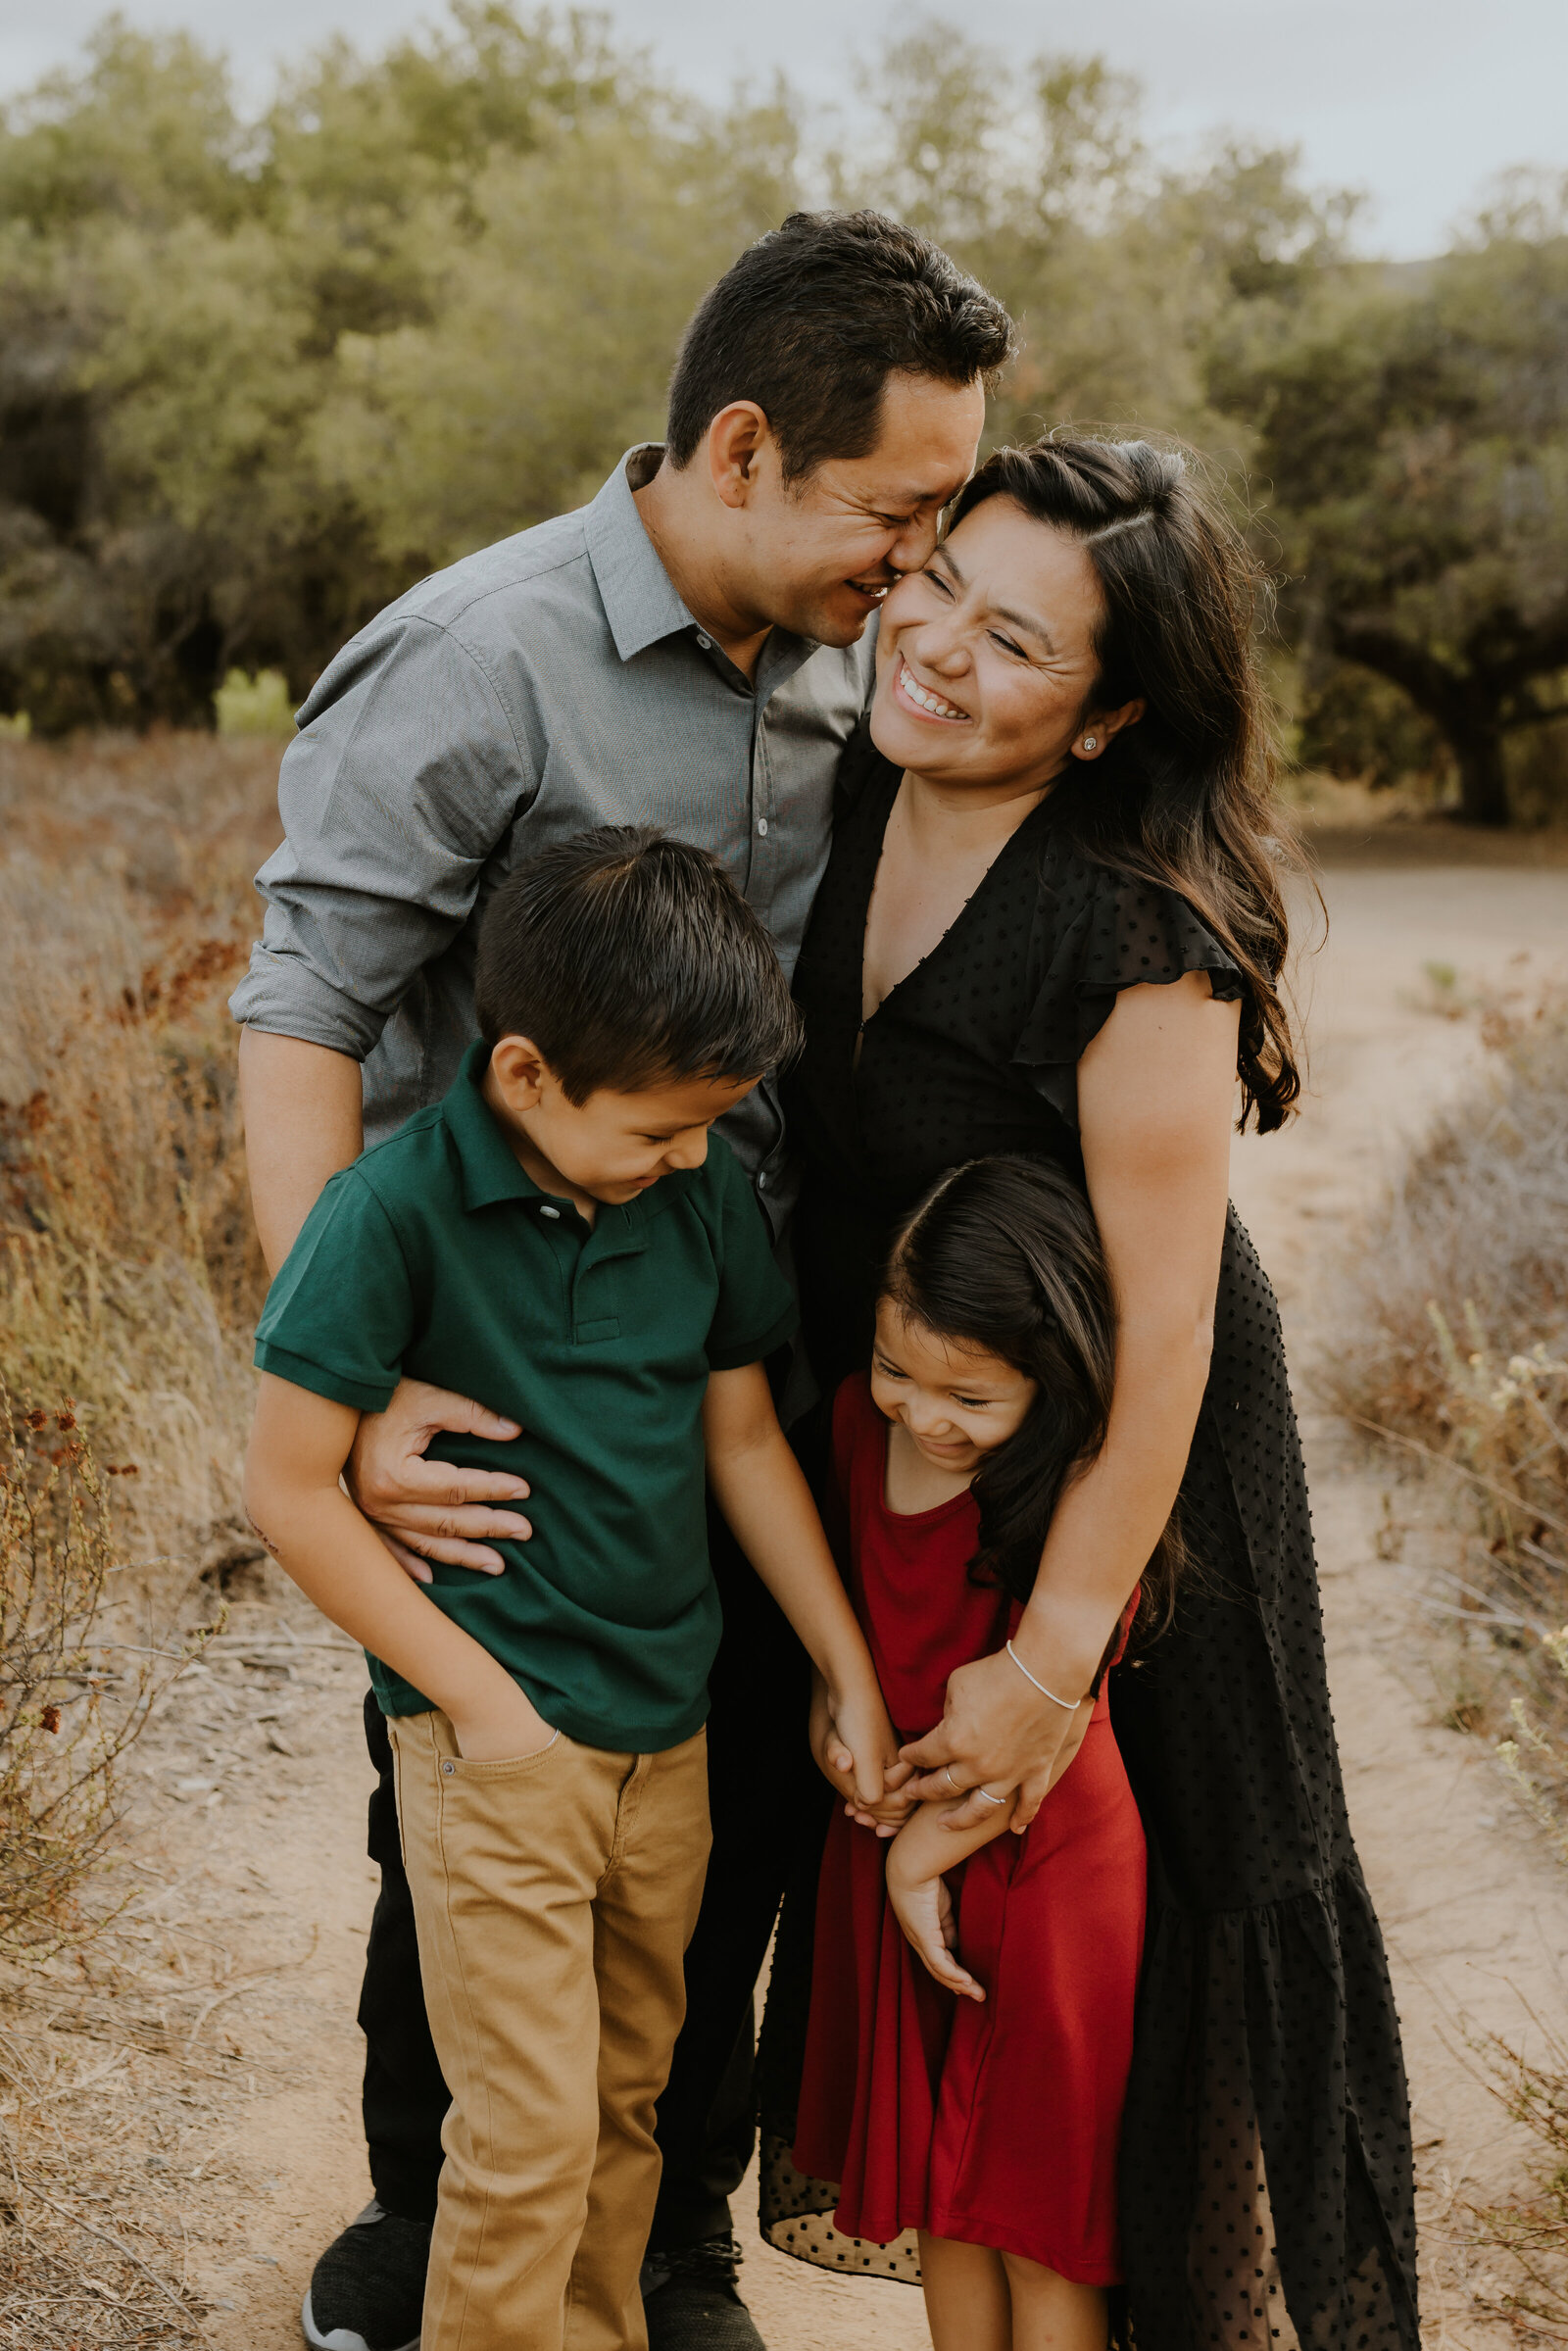 Adorable family portrait from phtooshoot Temecula, California Wedding and lifestyle photographer Yescphotography